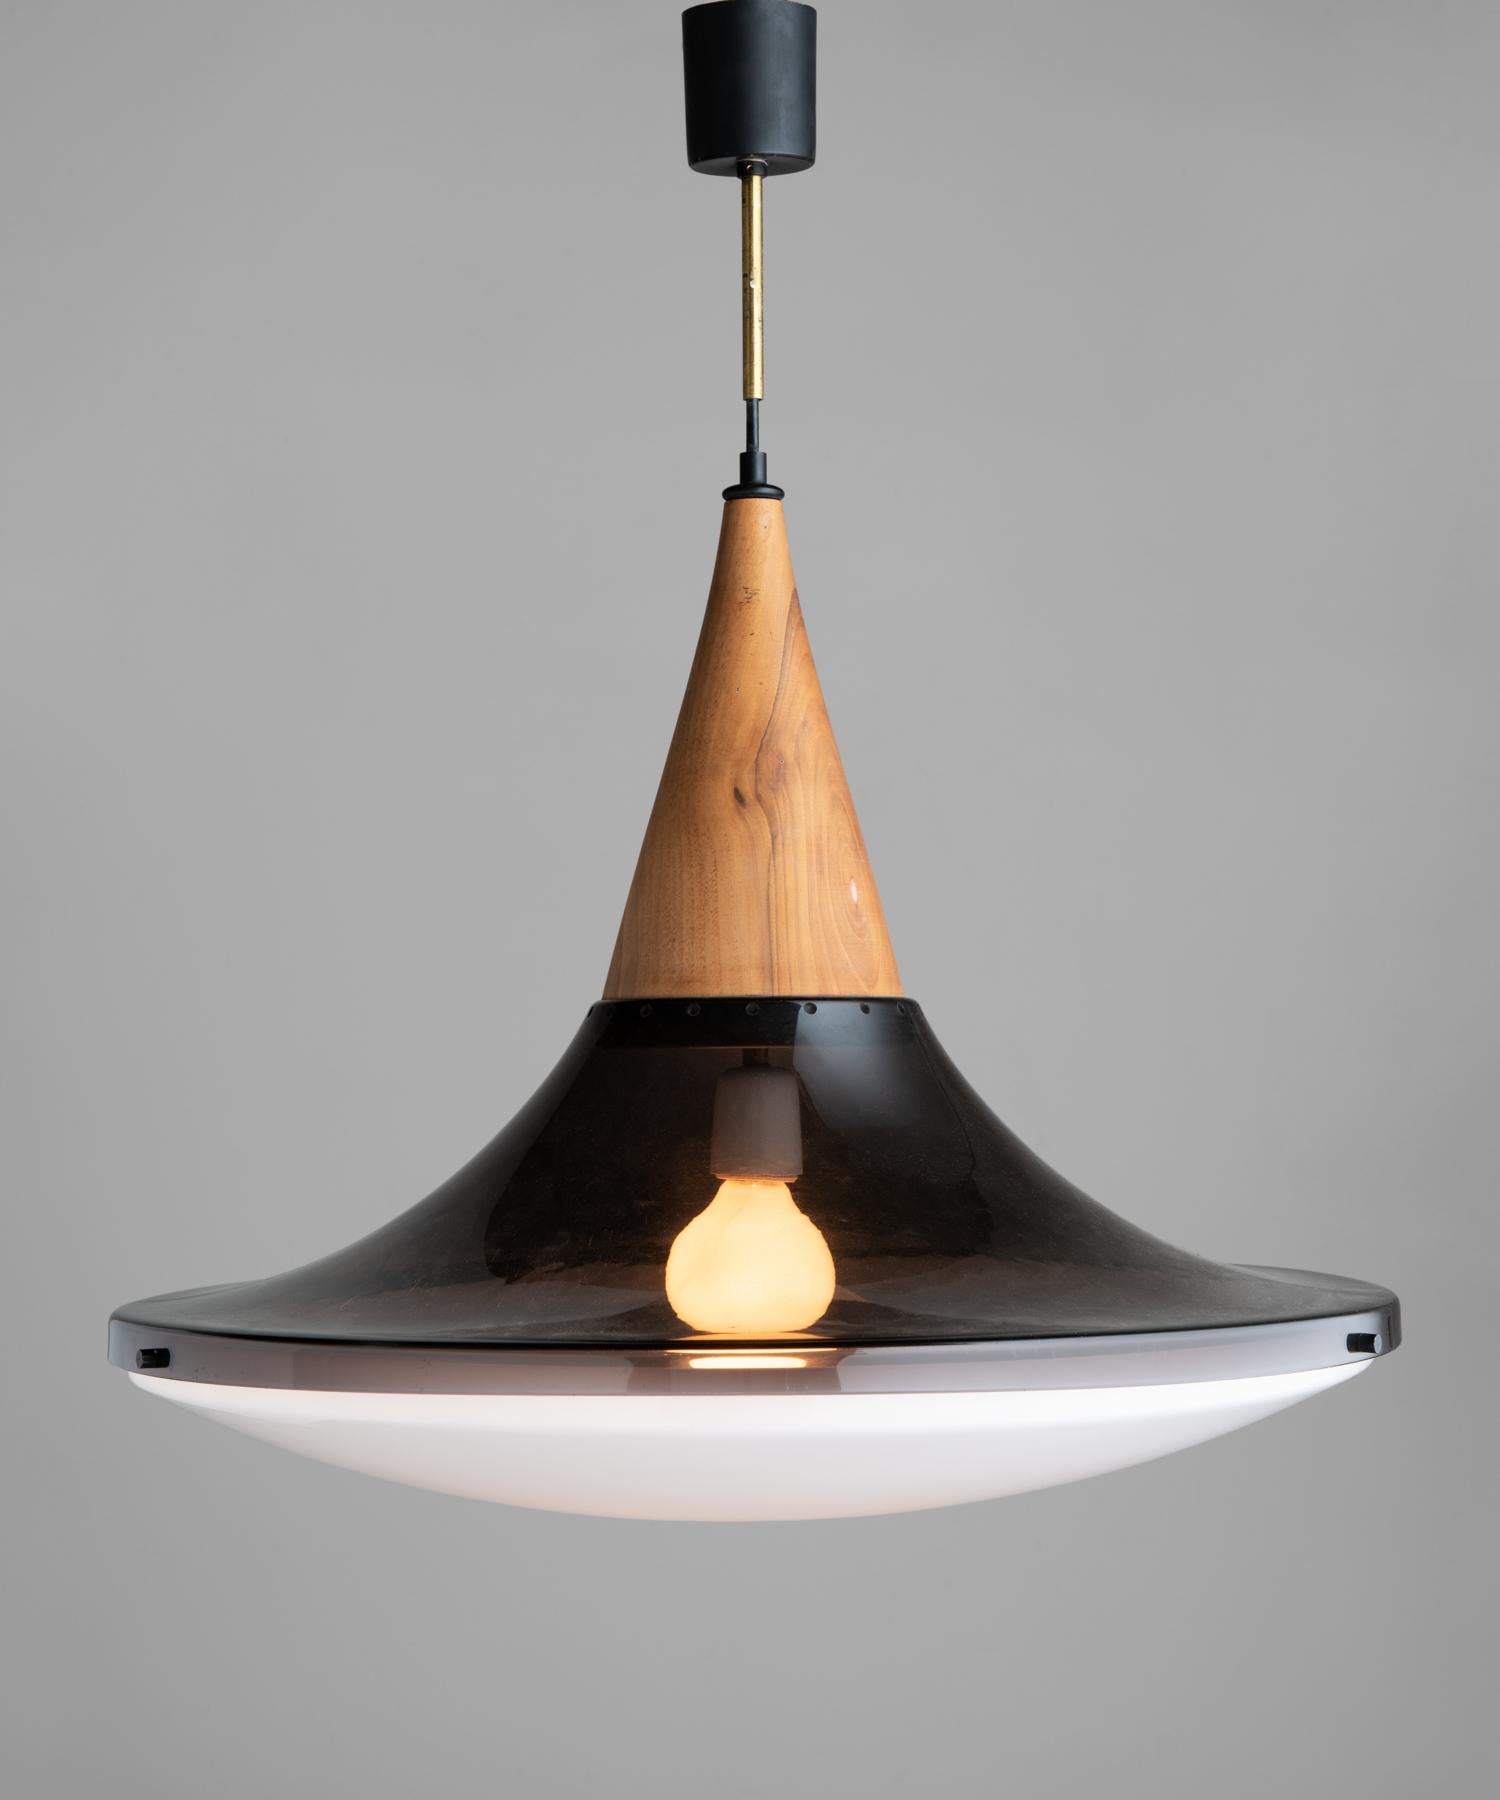 Suspension lamp by Goffredo Reggiani, Italy, circa 1960.

With wooden fitter and two-part plexiglass shade.

Measures: 24